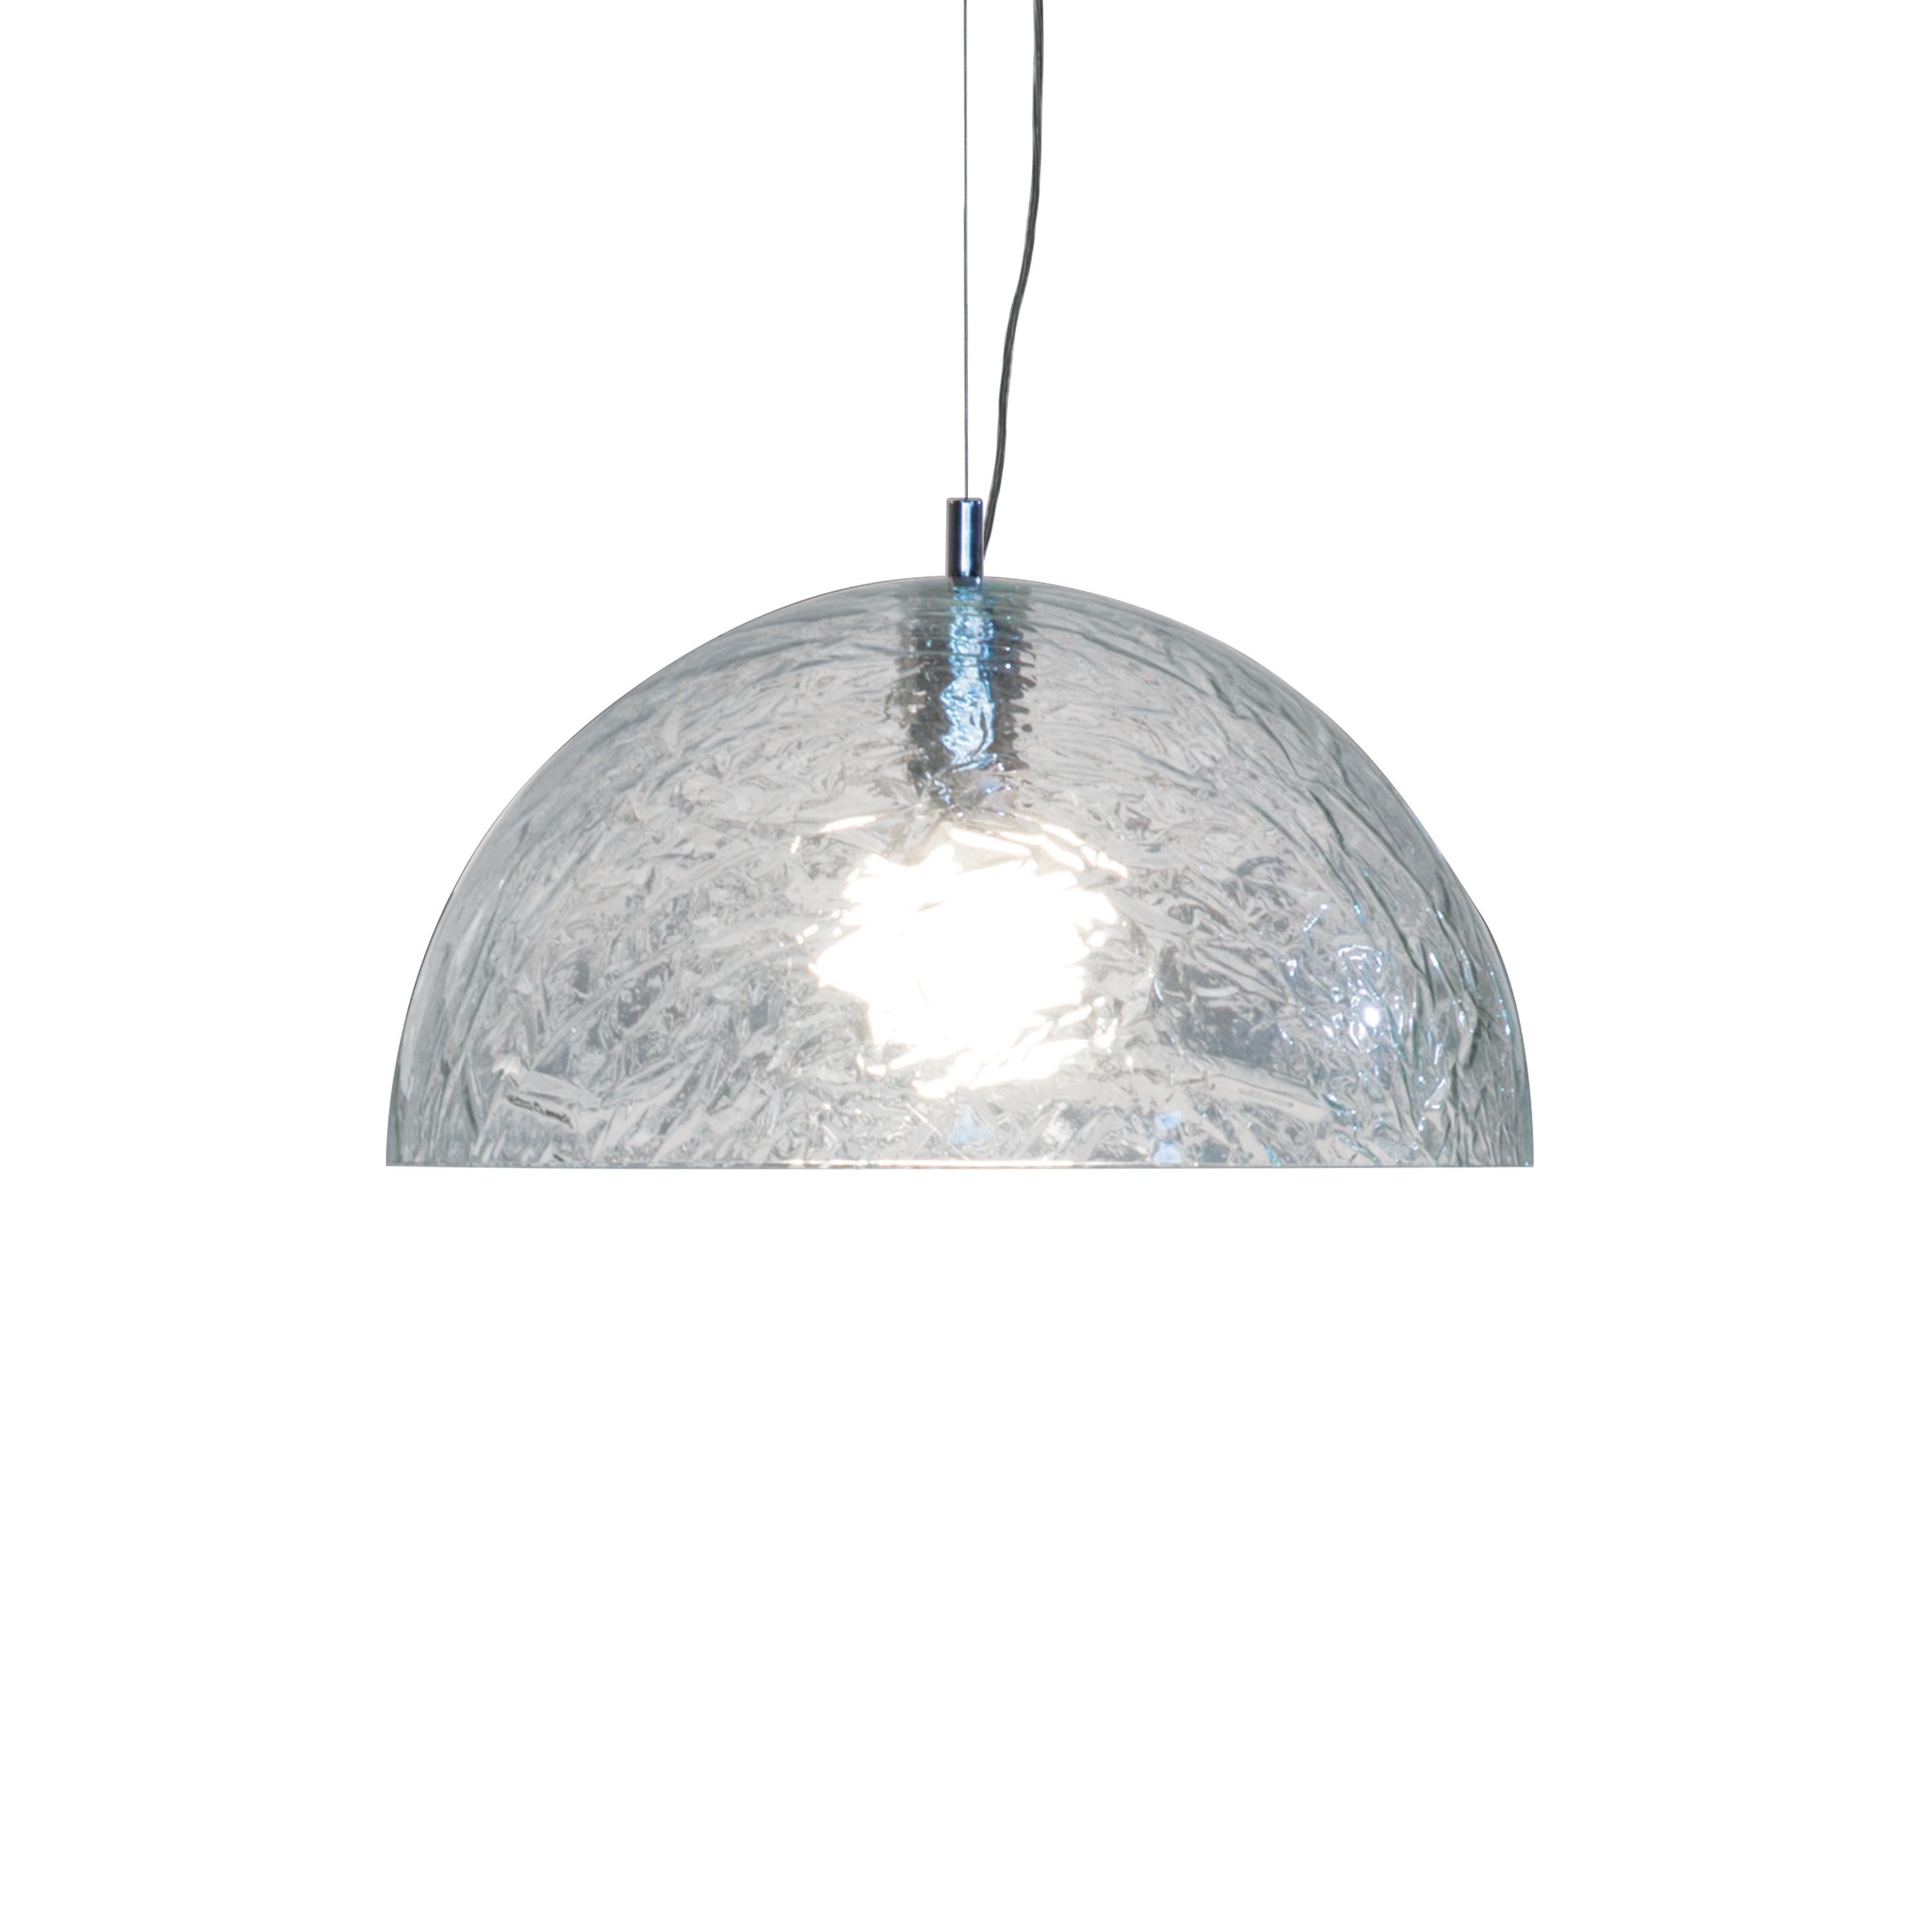 For Sale: Clear (Ice) Martinelli Luce Bubbles 2033 Large Pendant Light by Emiliana Martinelli